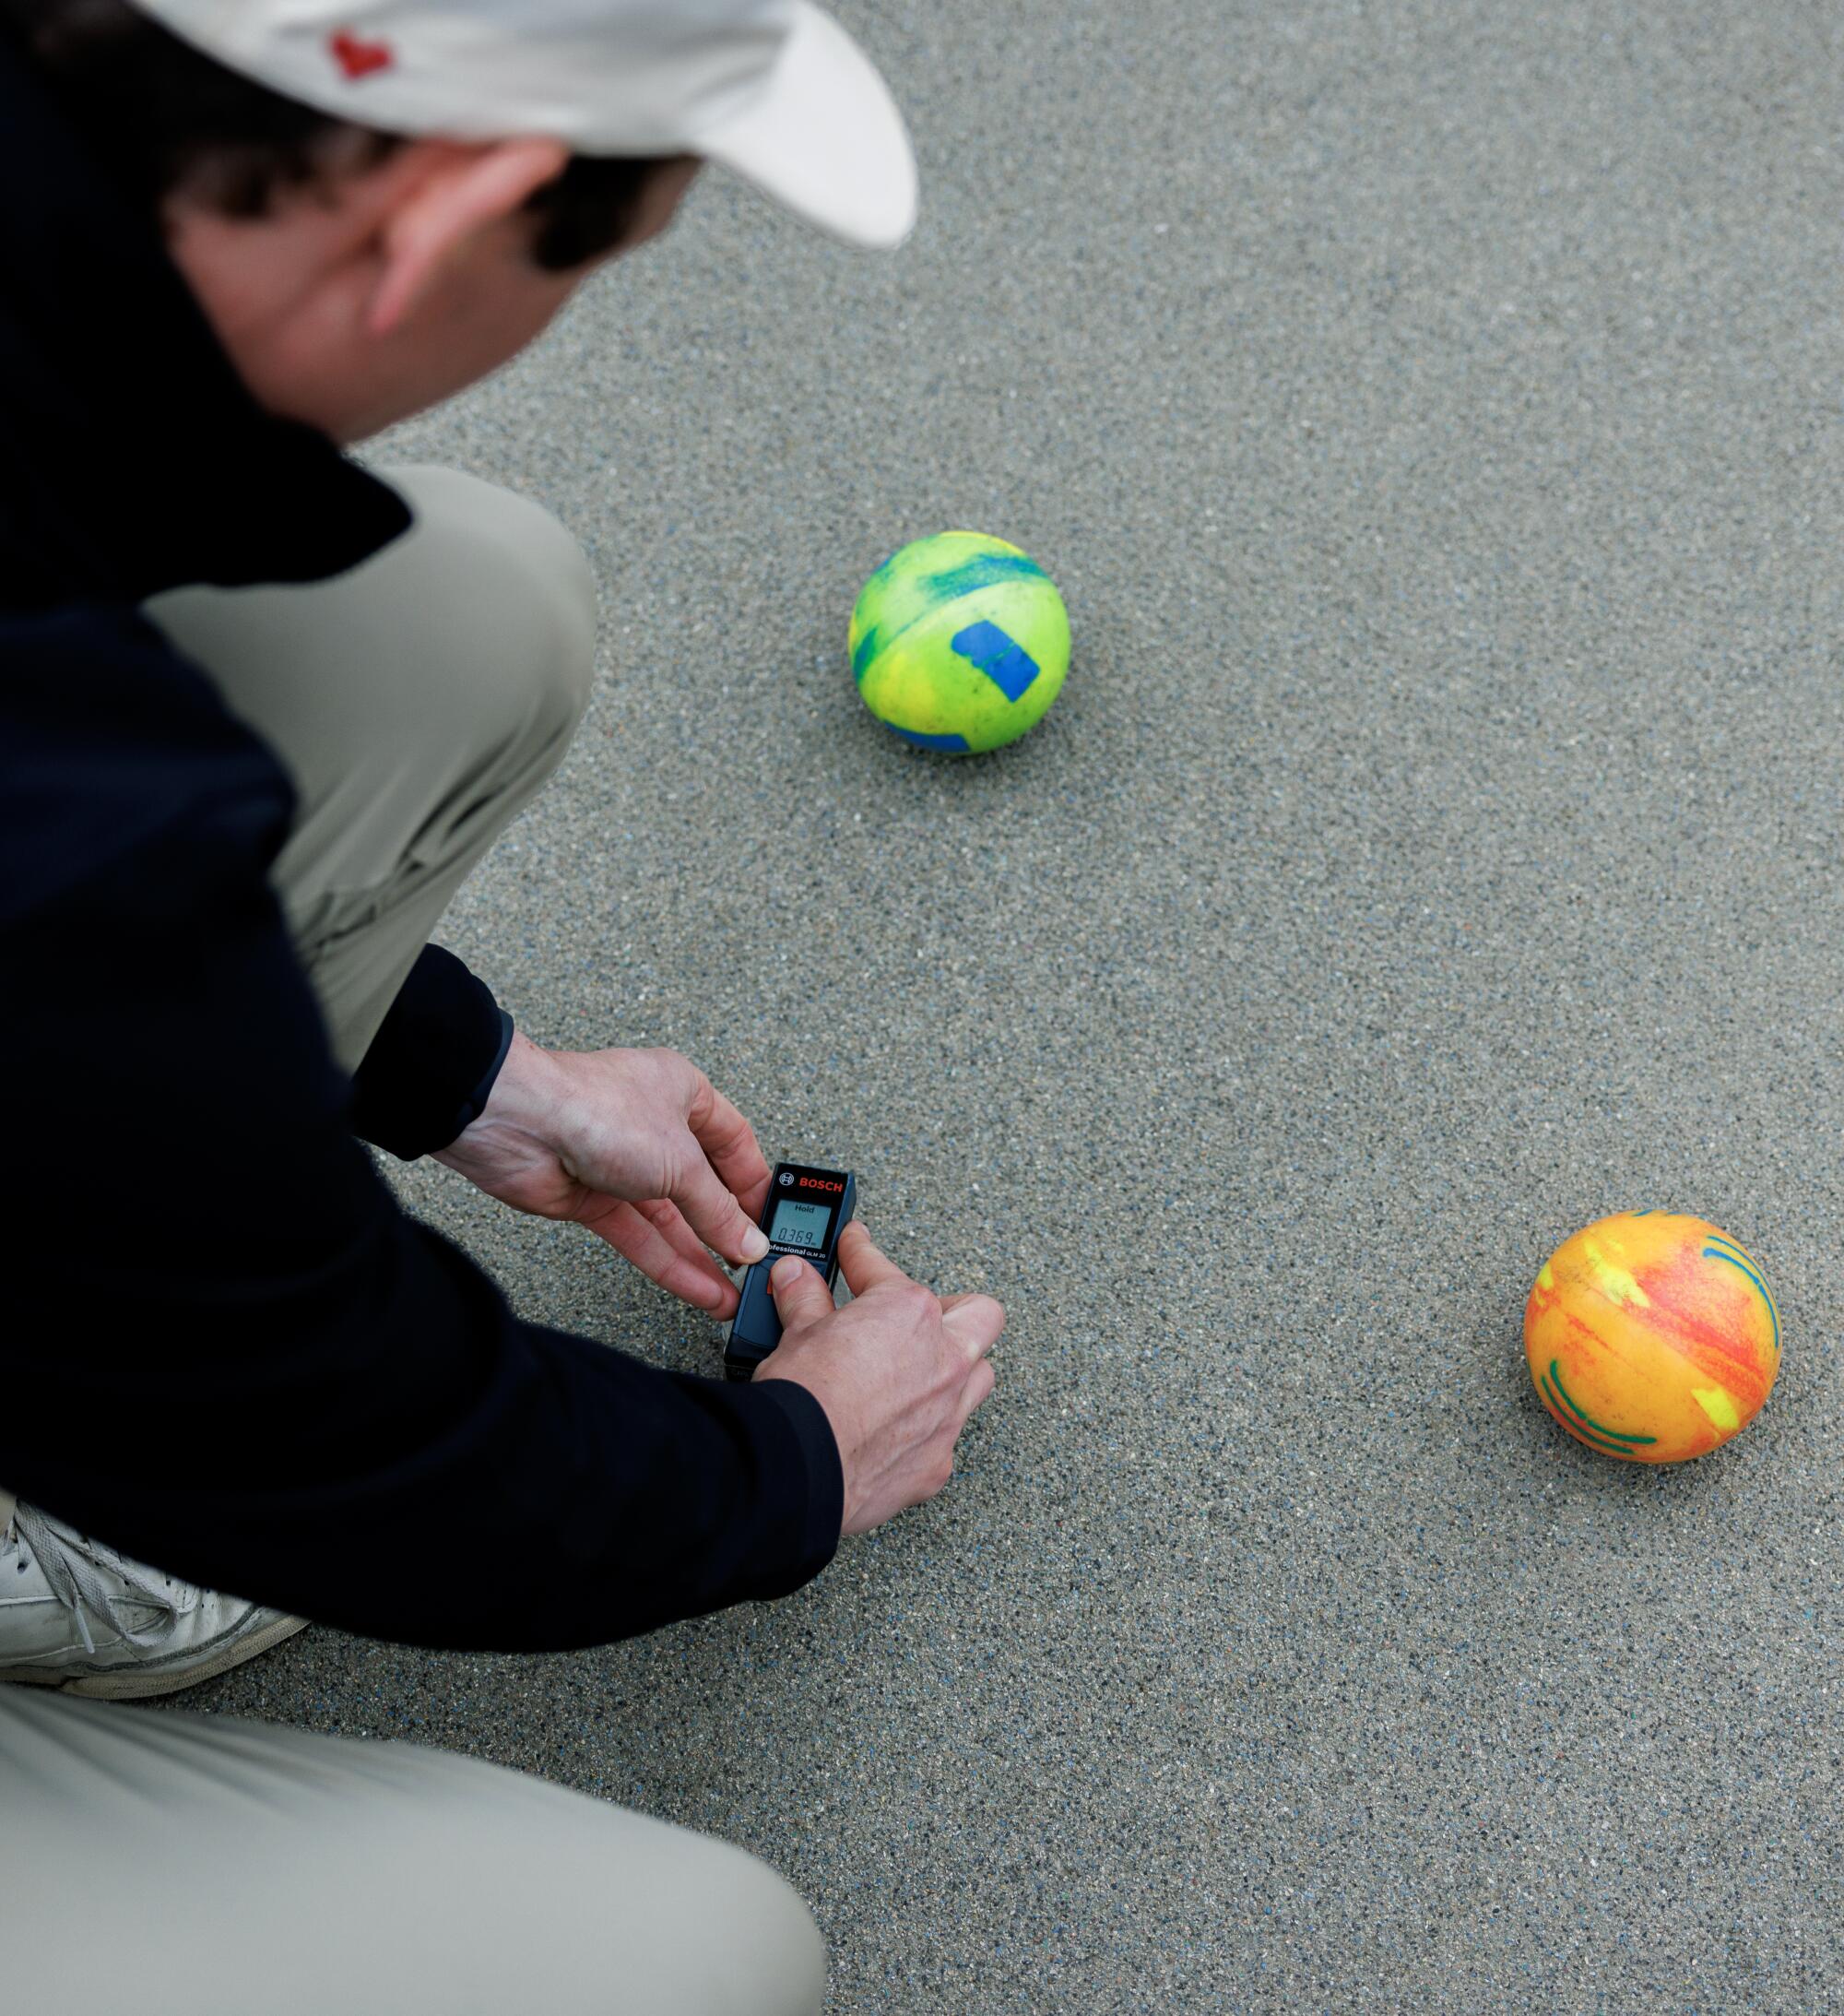 A man using a digital device to measure the distance between two bocce balls.